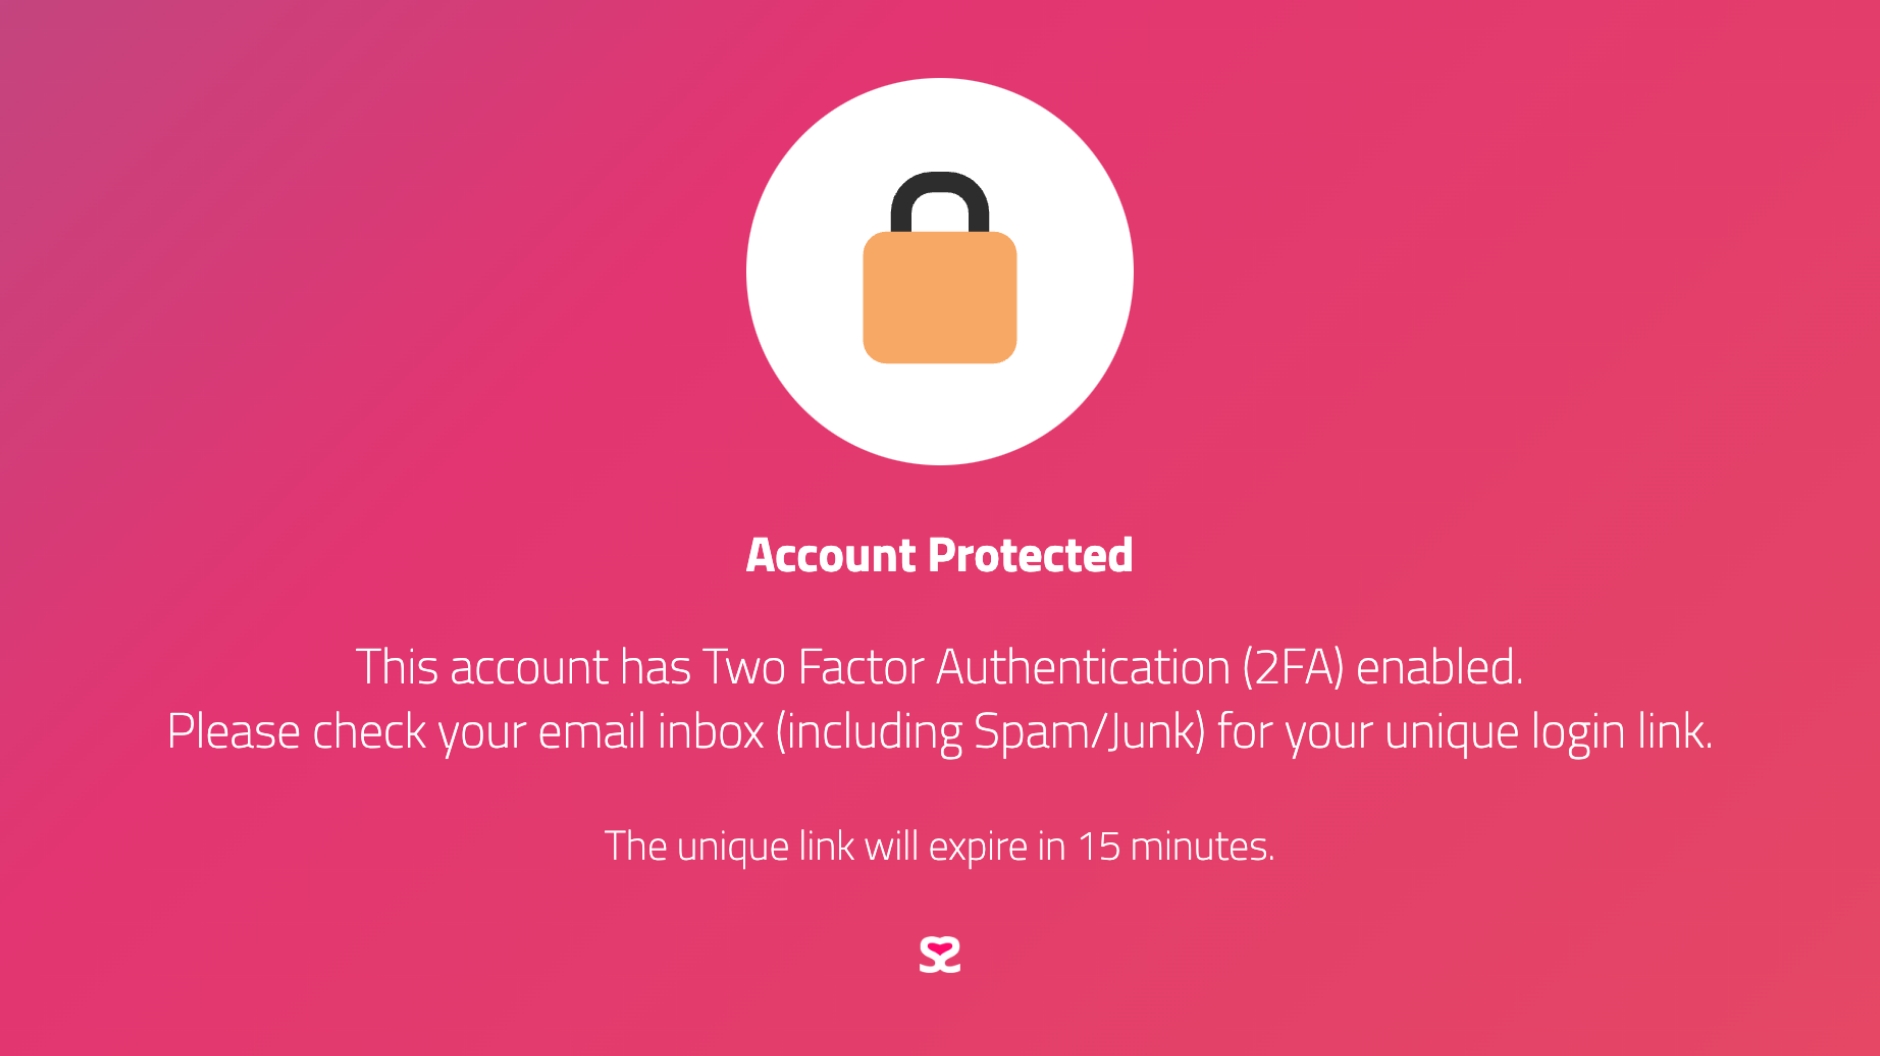 When 2FA is enabled, the user will see this screen after a log-in.